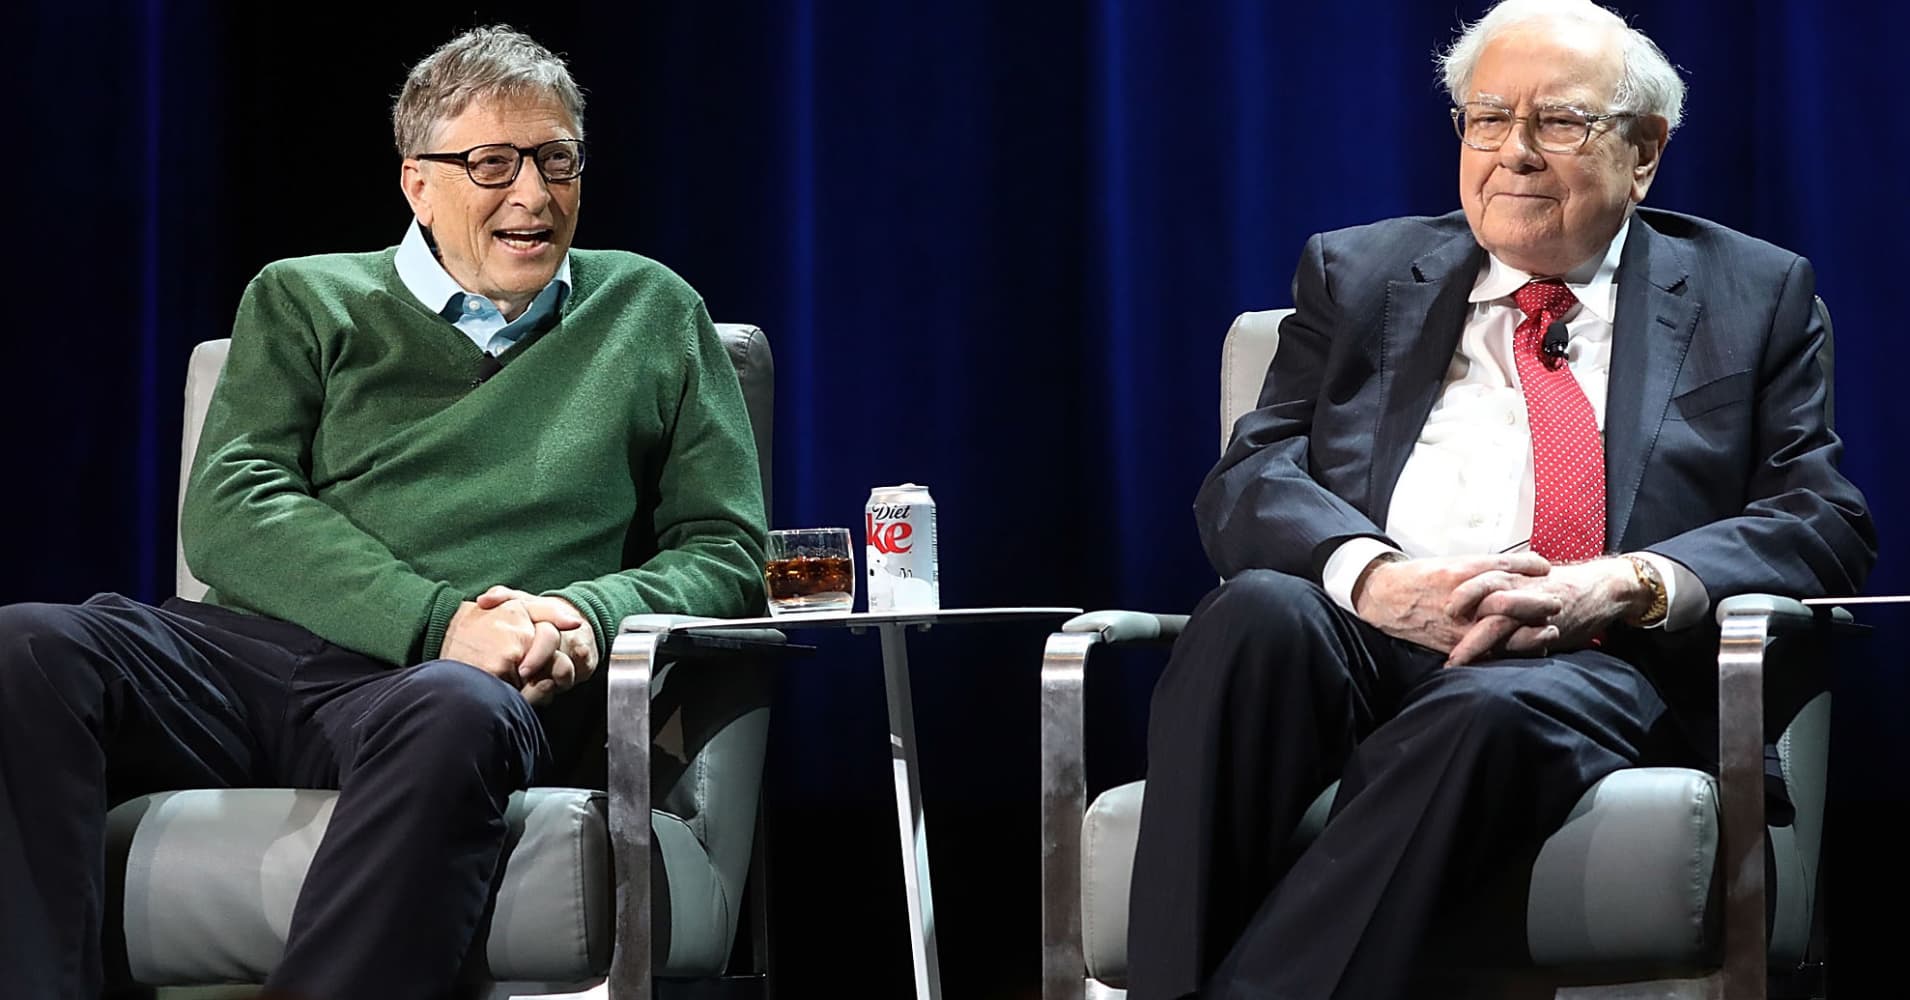 How much money does Bill Gates make in one minute?